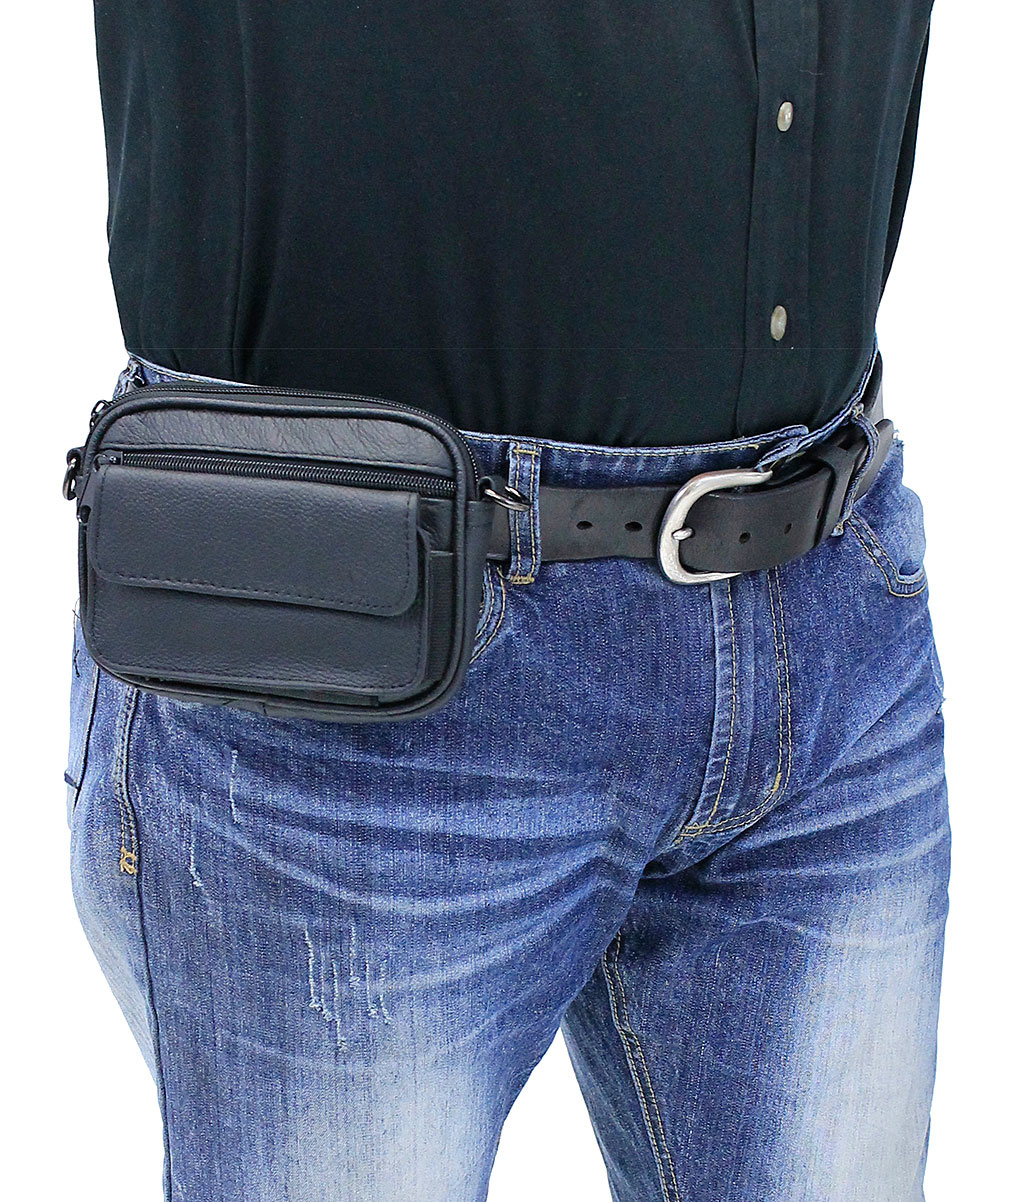  Genuine Leather Fanny Pack Purse 7-Zipper-Pouches Waist Bag  with Adjustable Belt Black Soft Lambskin